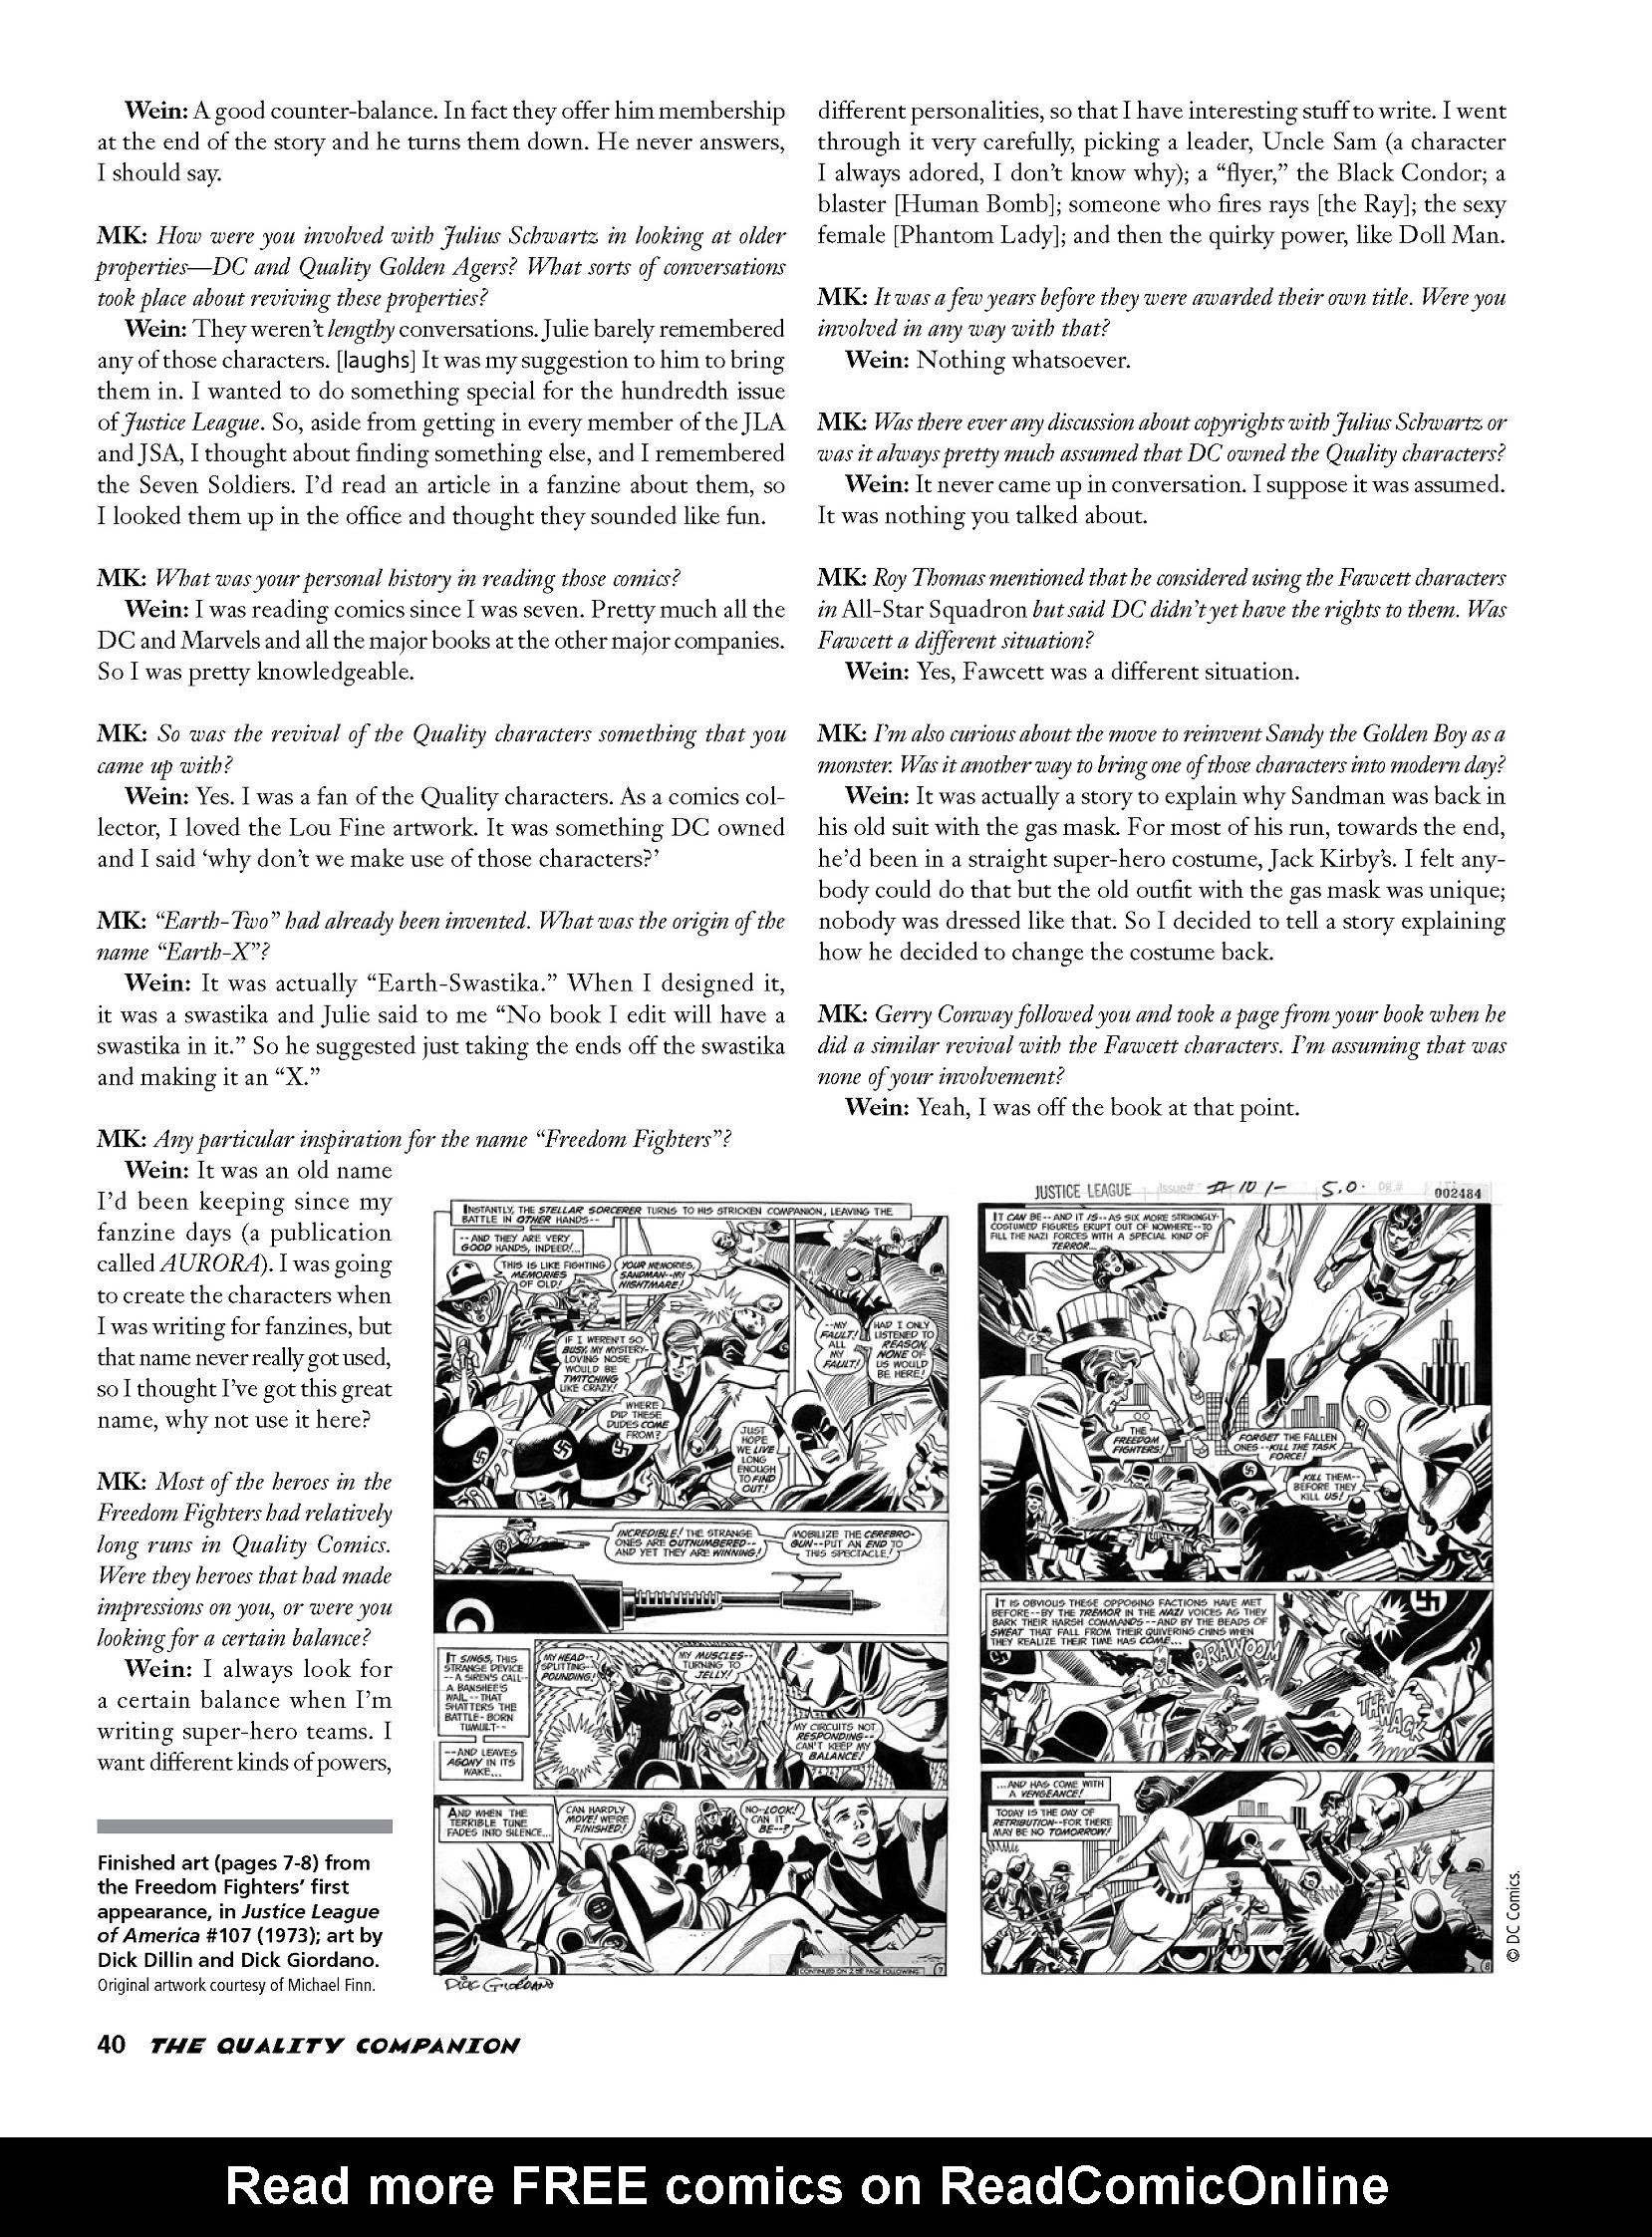 Read online The Quality Companion comic -  Issue # TPB (Part 2) - 7